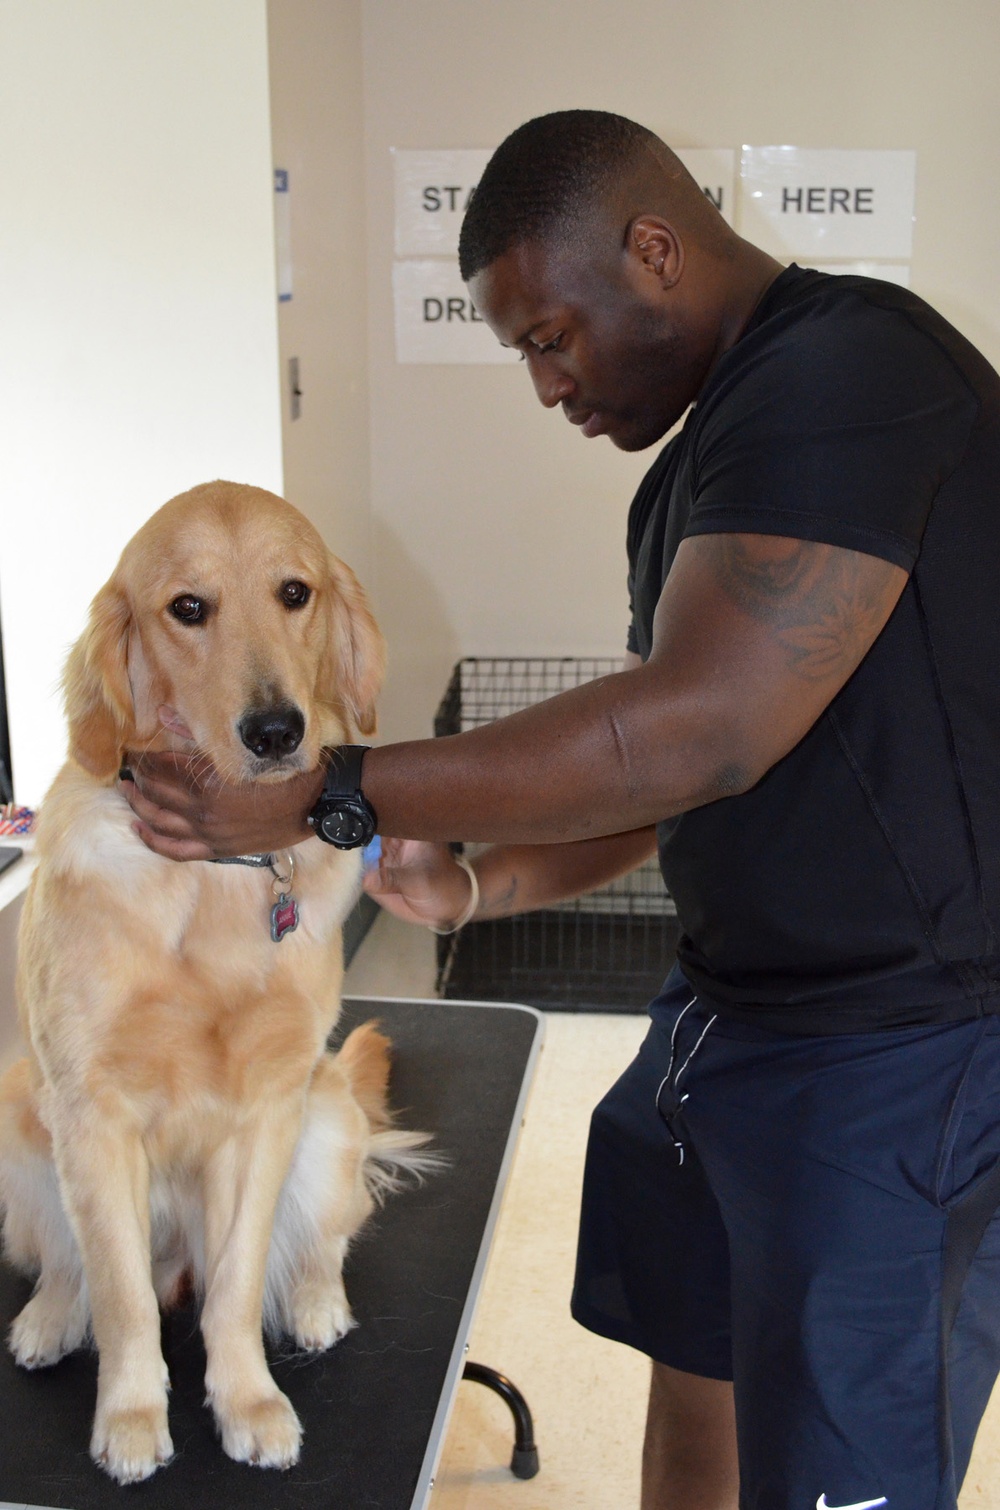 Warriors receive therapy through service dog training program